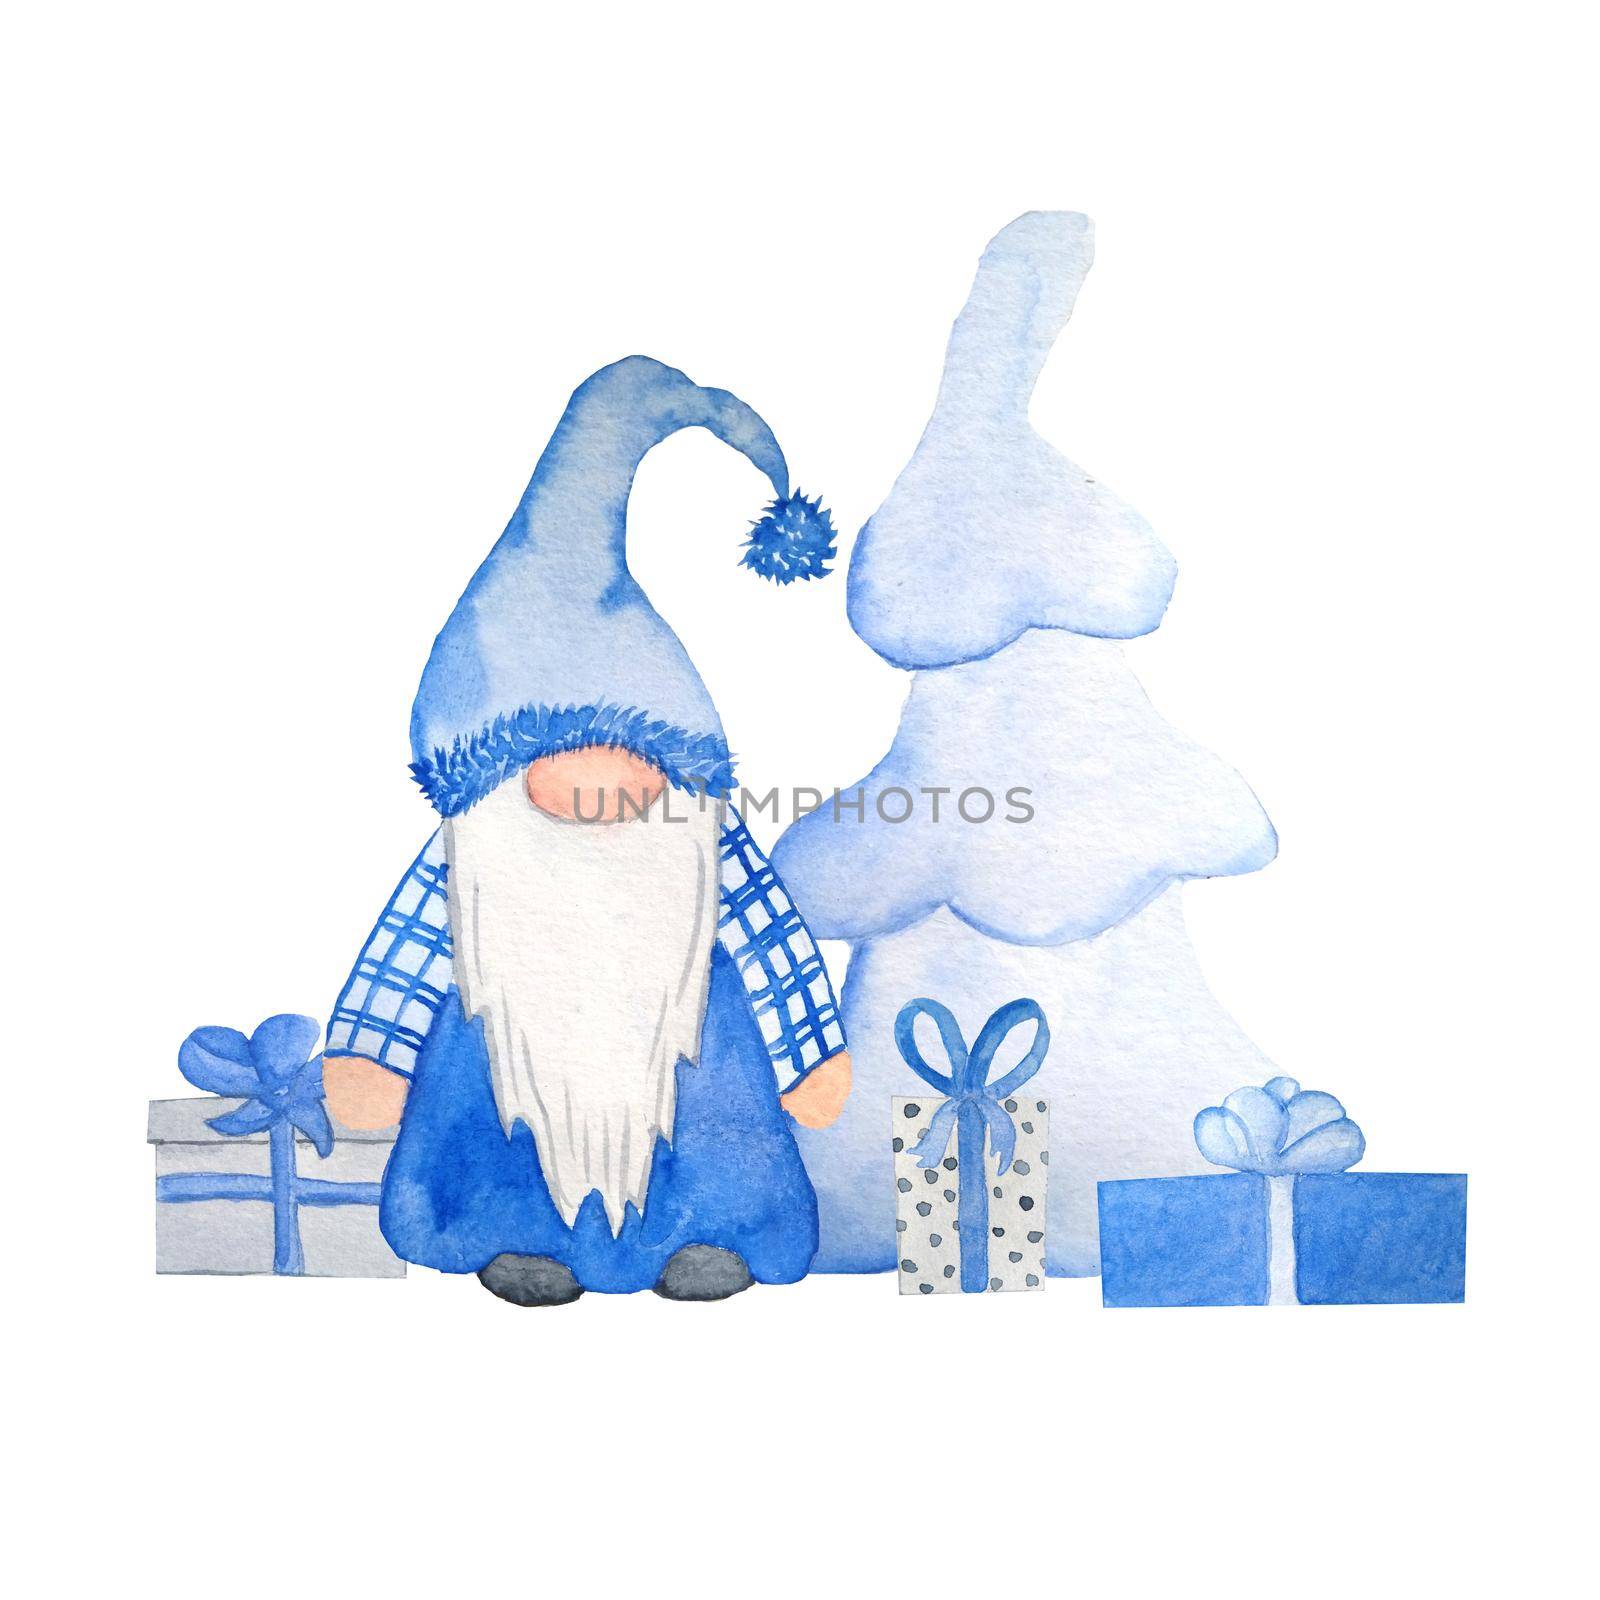 Watercolor hand drawn illustration of Christmas nordic scandinavian gnome. Design for new year cards invitations in neutral blue grey. Christmas tree presents gifts ornament decoration cartoon. by Lagmar